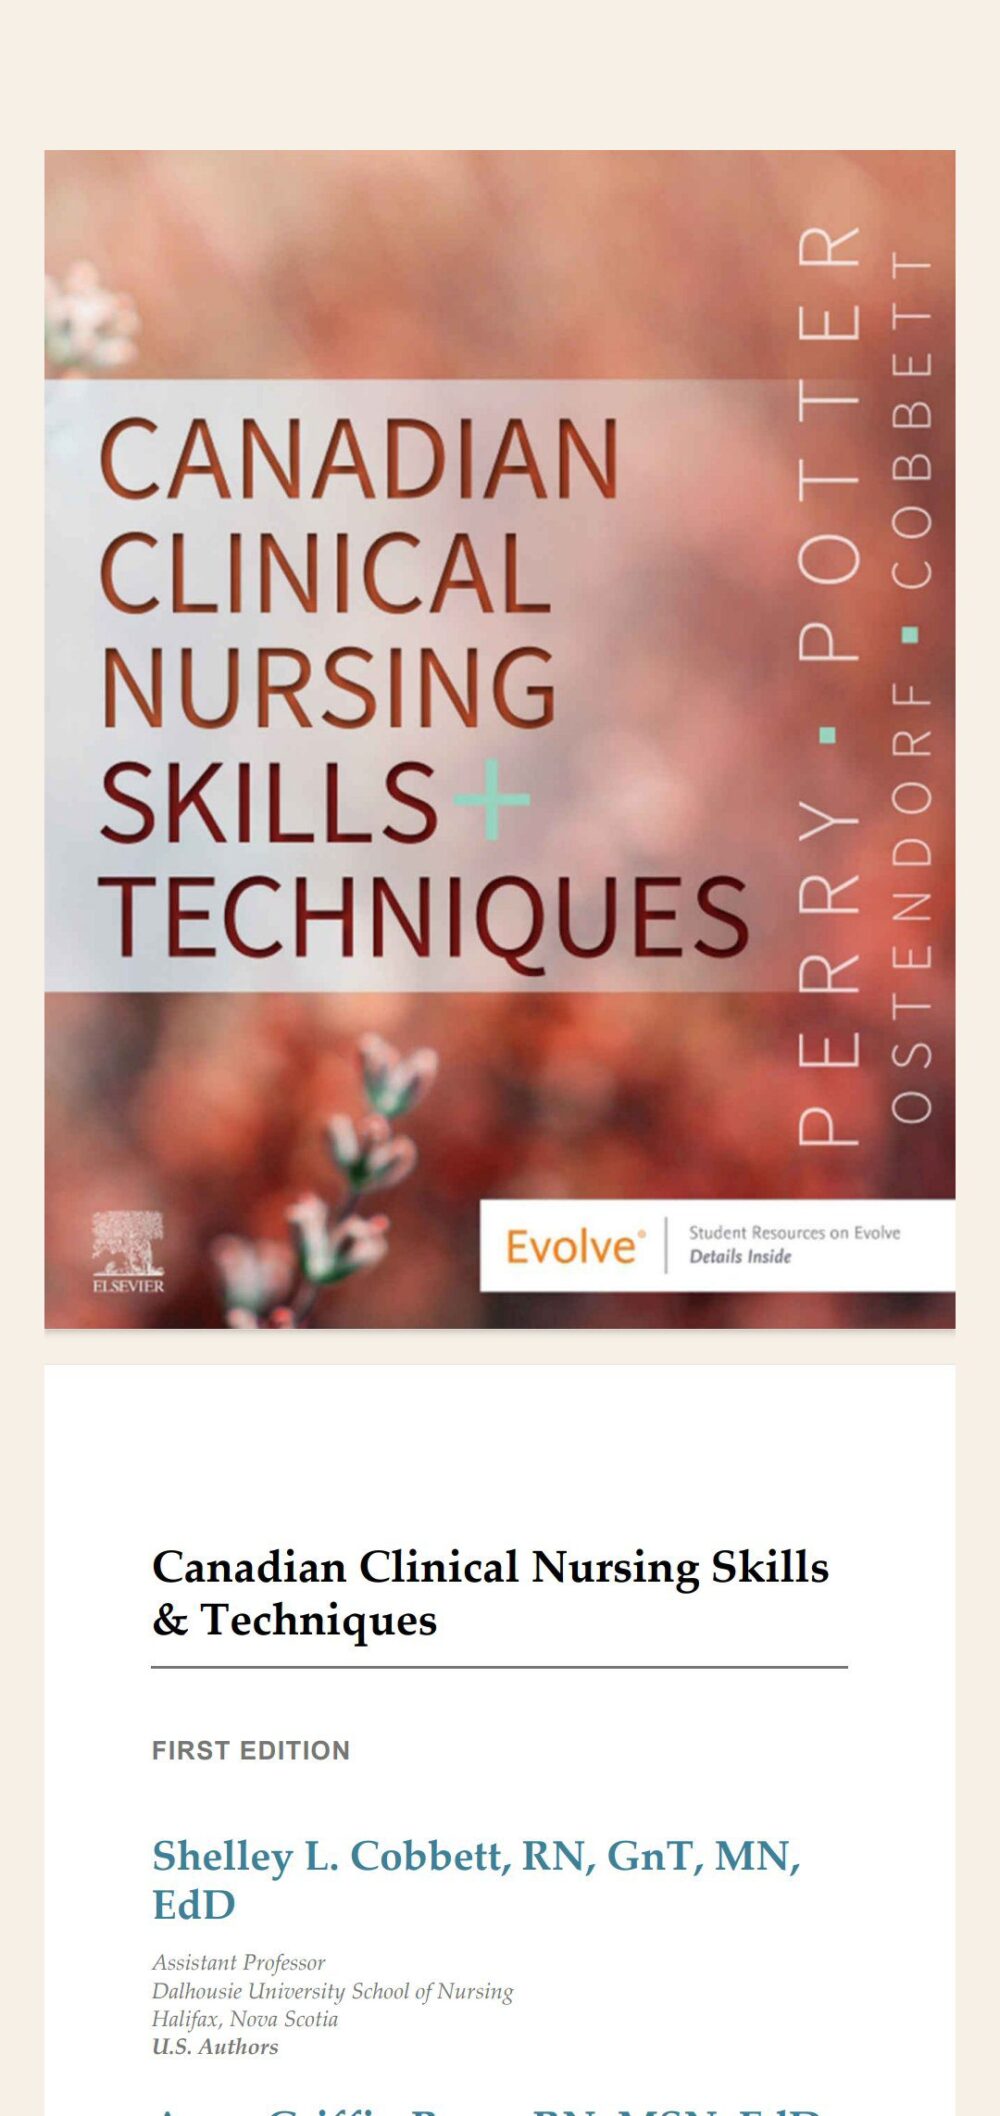 Canadian Clinical Nursing Skills and Techniques (Potter, Perry)